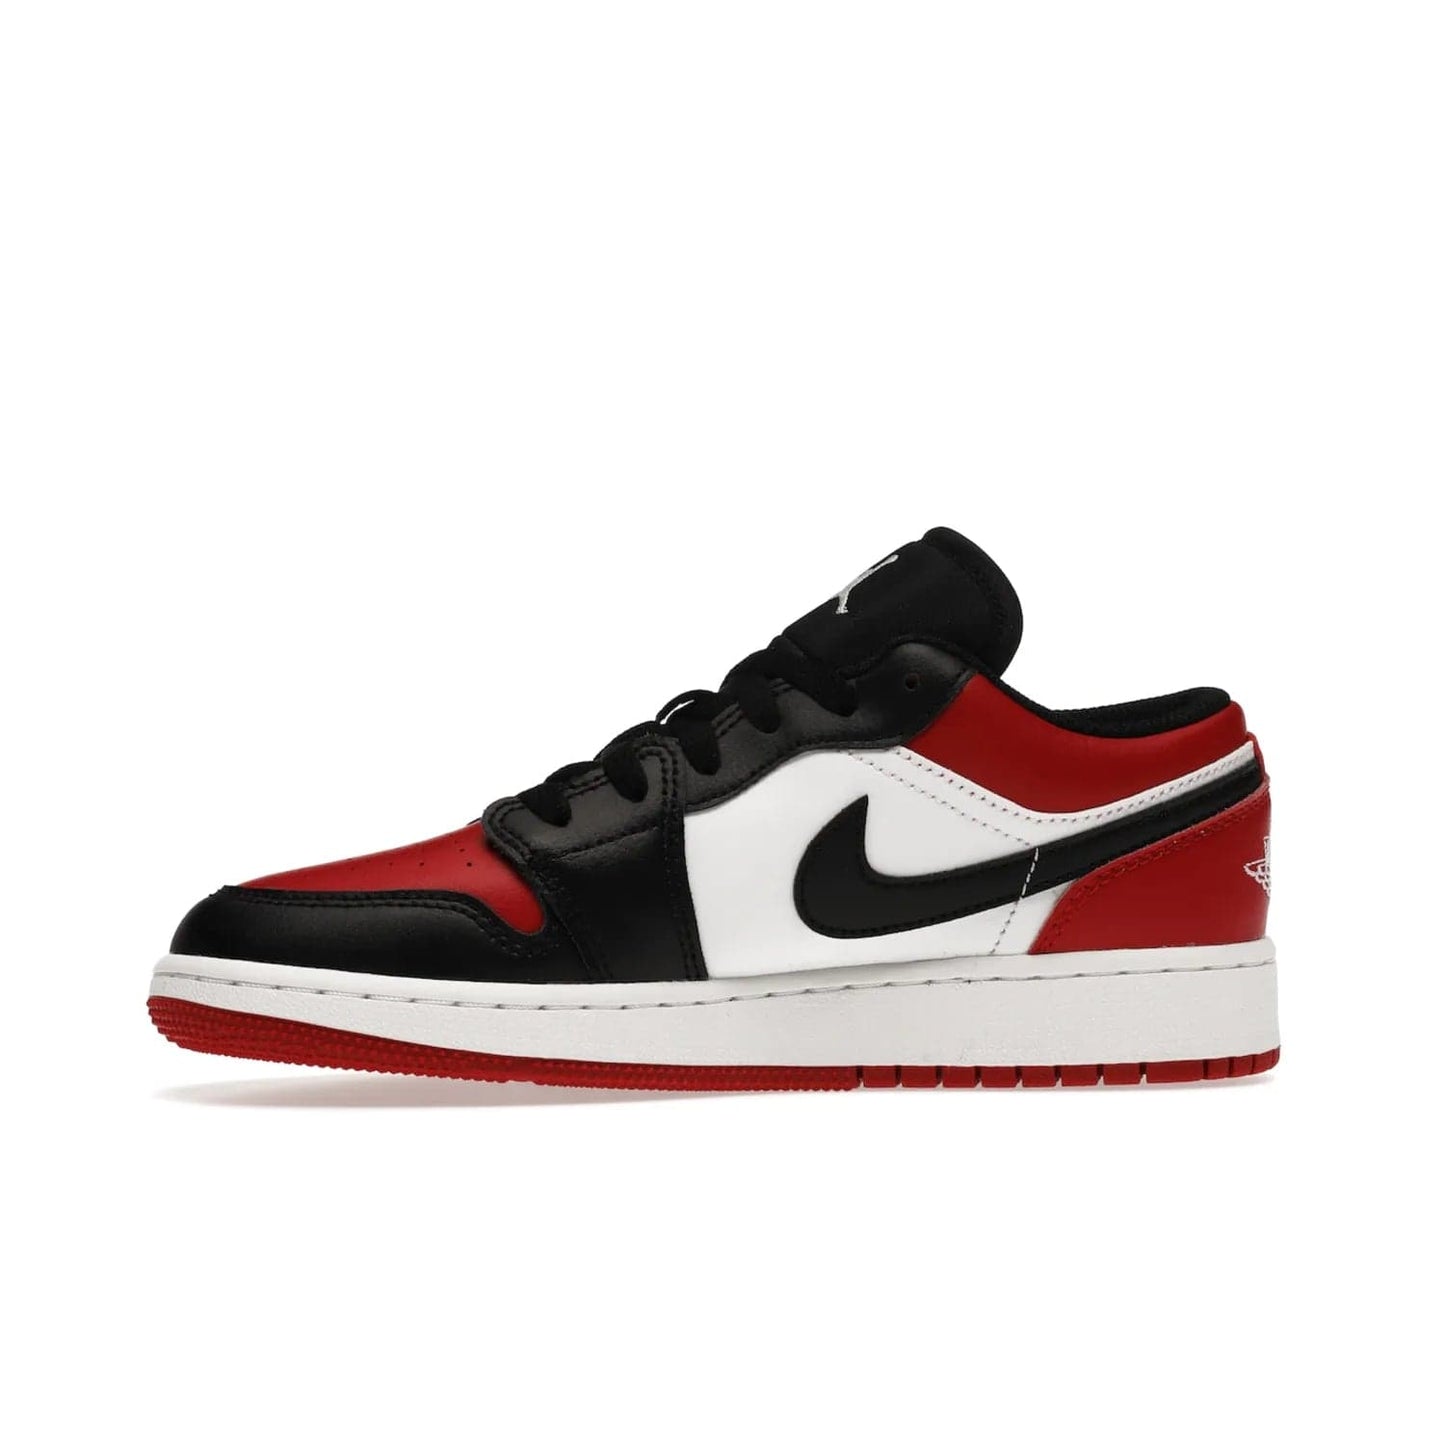 Jordan 1 Low Bred Toe (GS) - Image 18 - Only at www.BallersClubKickz.com - #
Iconic sneaker from Jordan brand with classic colorway, unique detailing & Air Jordan Wings logo. Step into the shoes of the greats with the Jordan 1 Low Bred Toe GS!